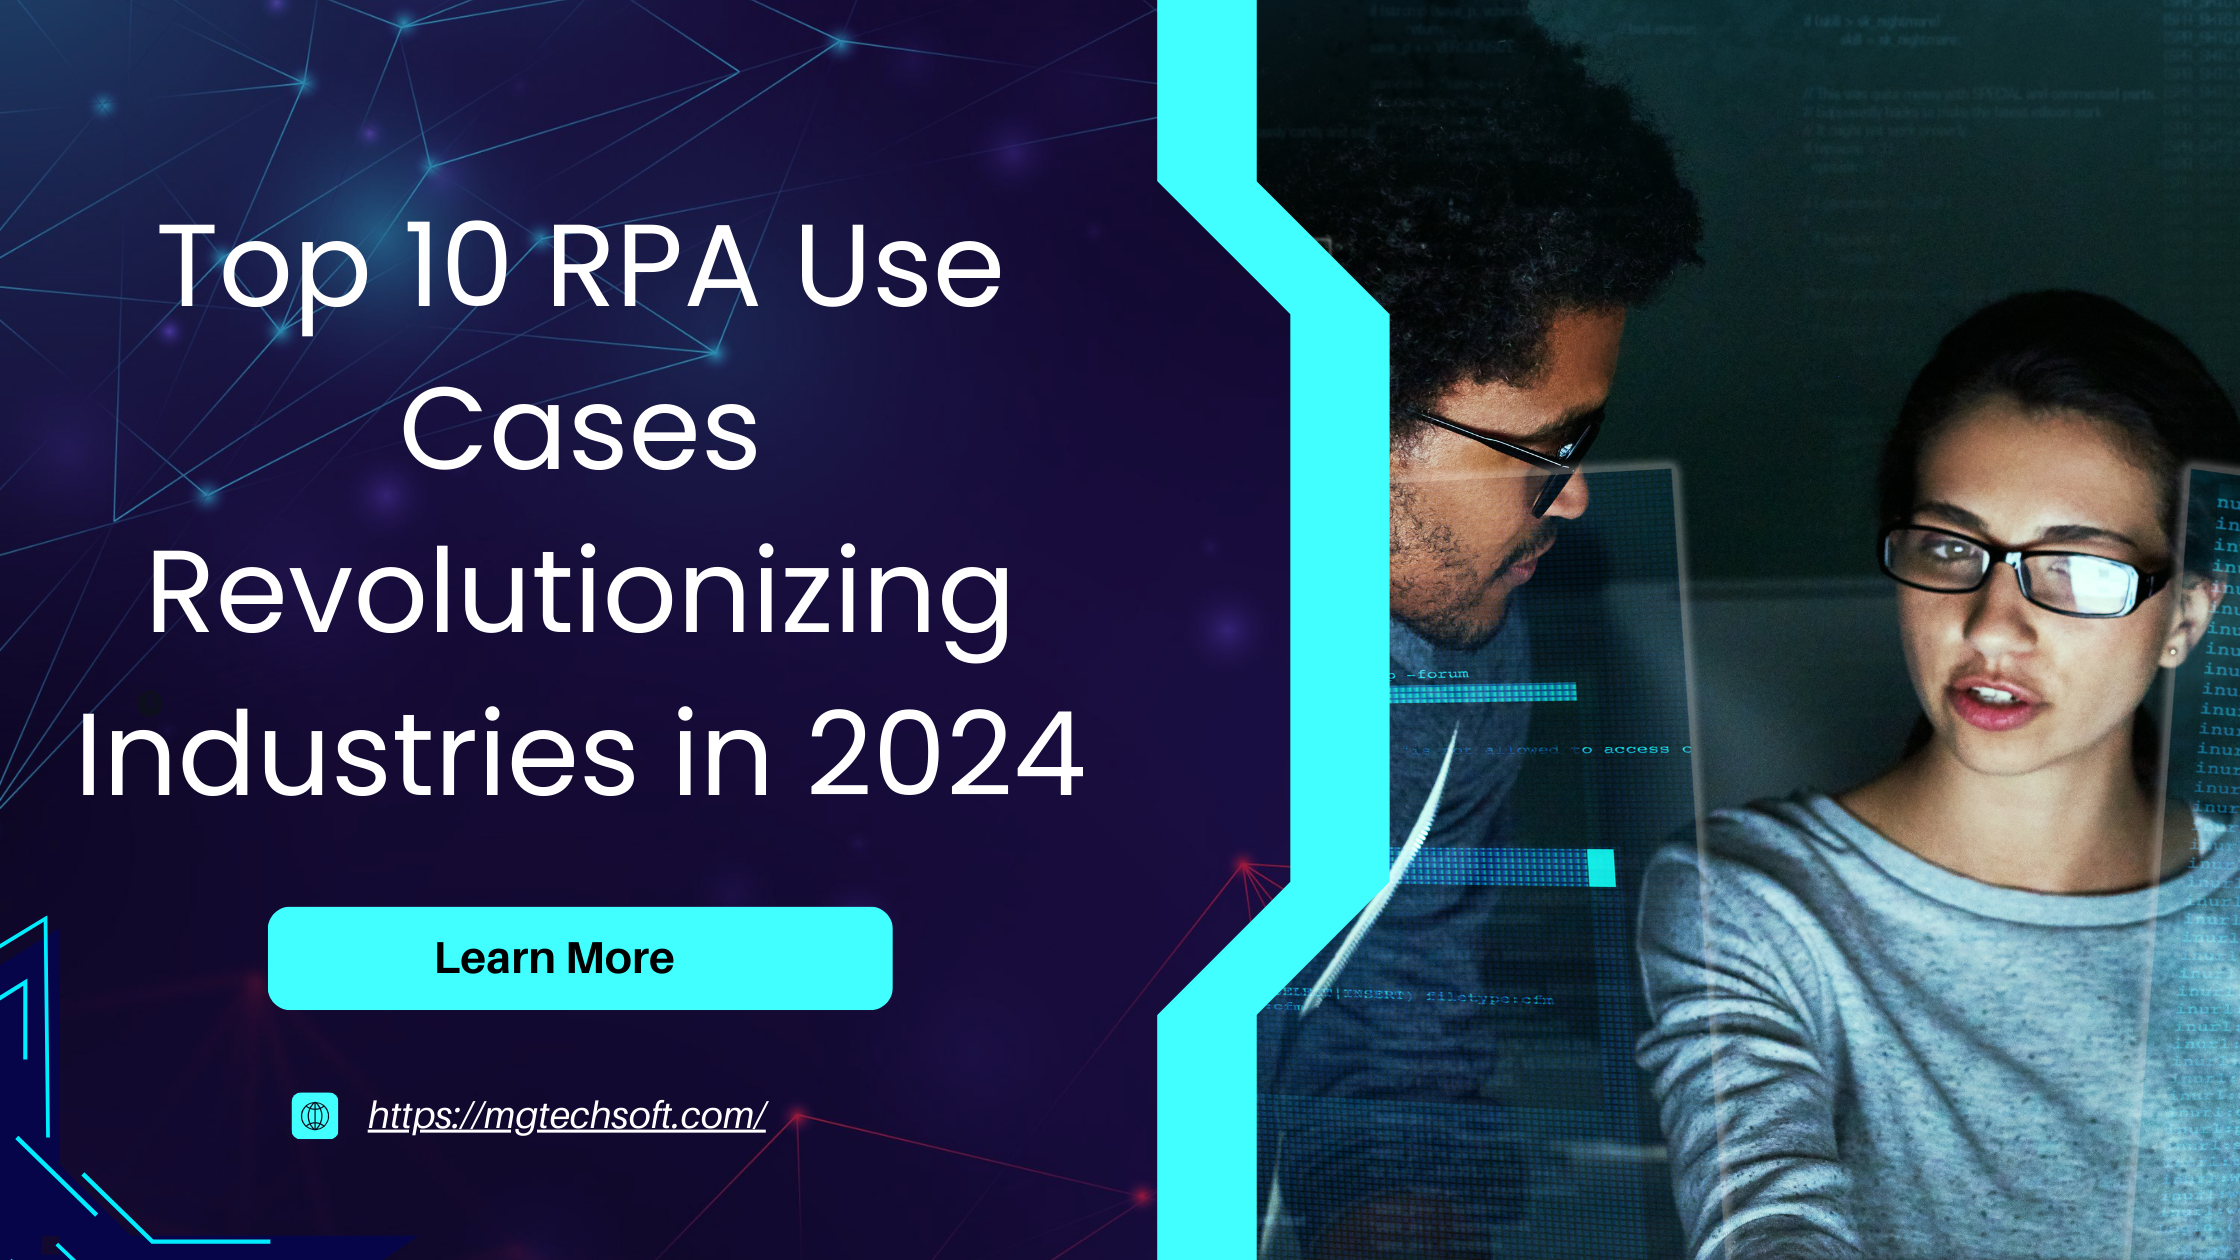 Top 10 RPA Use Cases Revolutionizing Industries in 2024